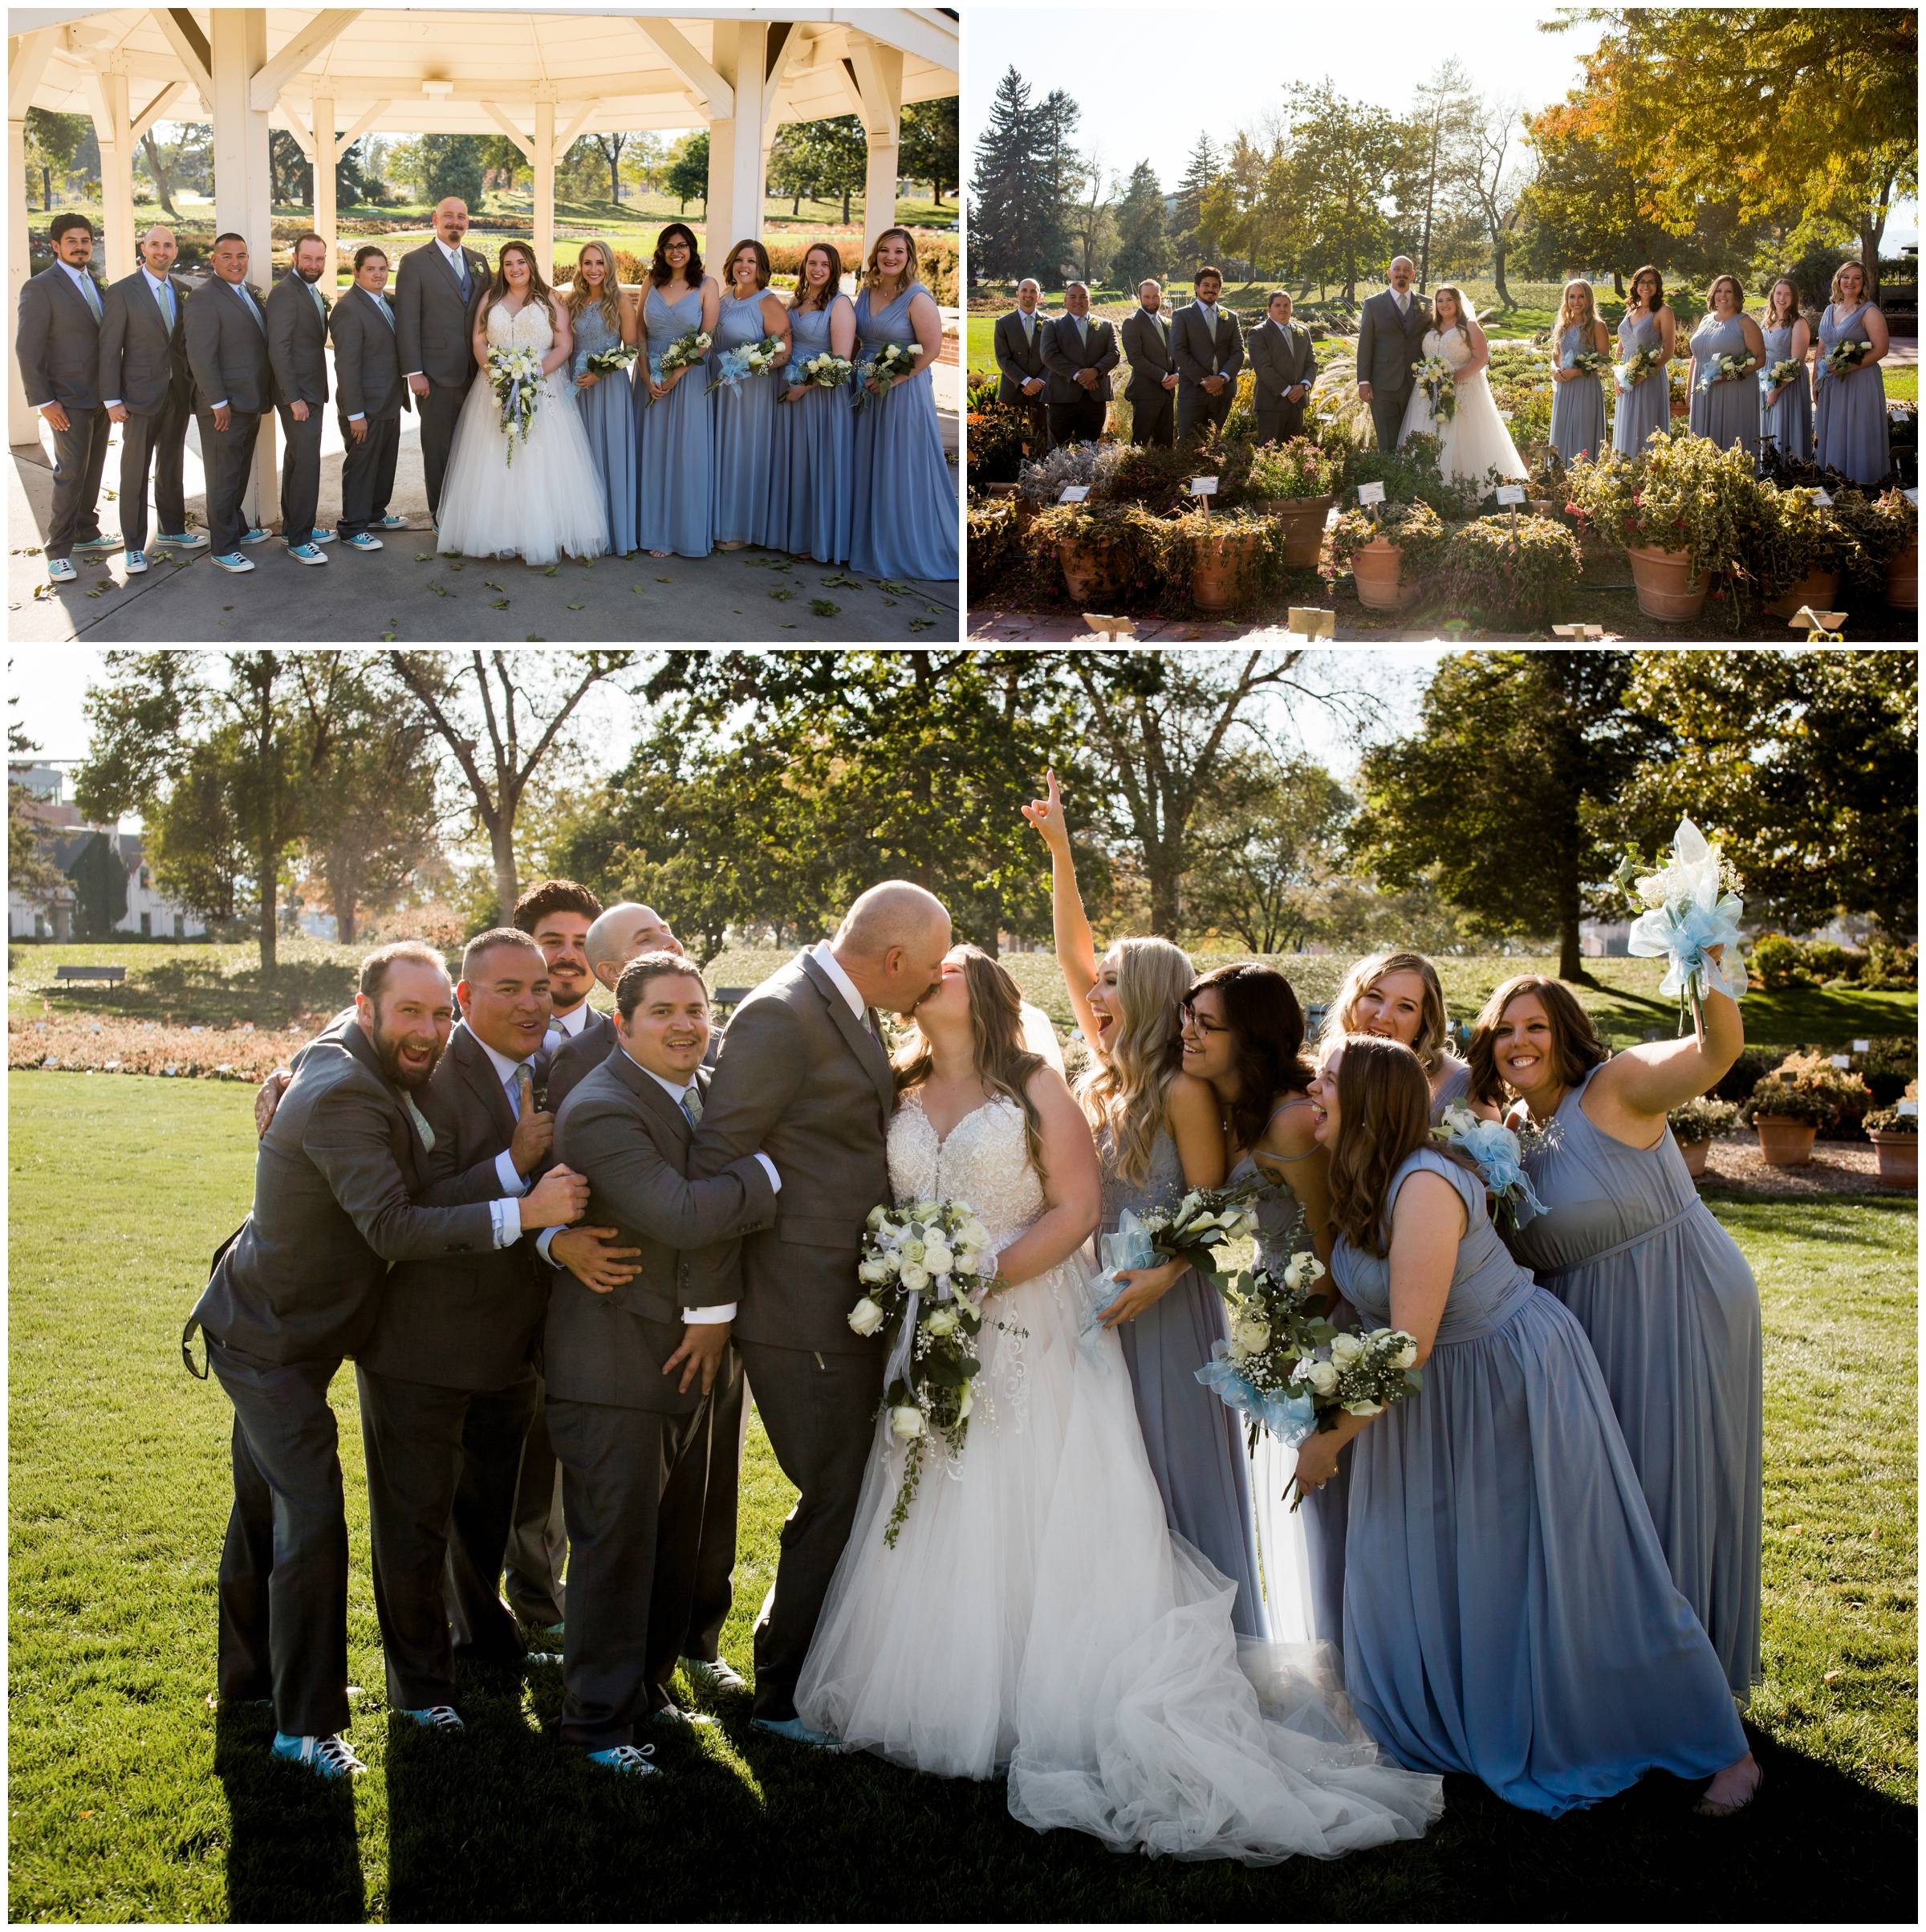 wedding party at CSU trial gardens in Ft. Collins